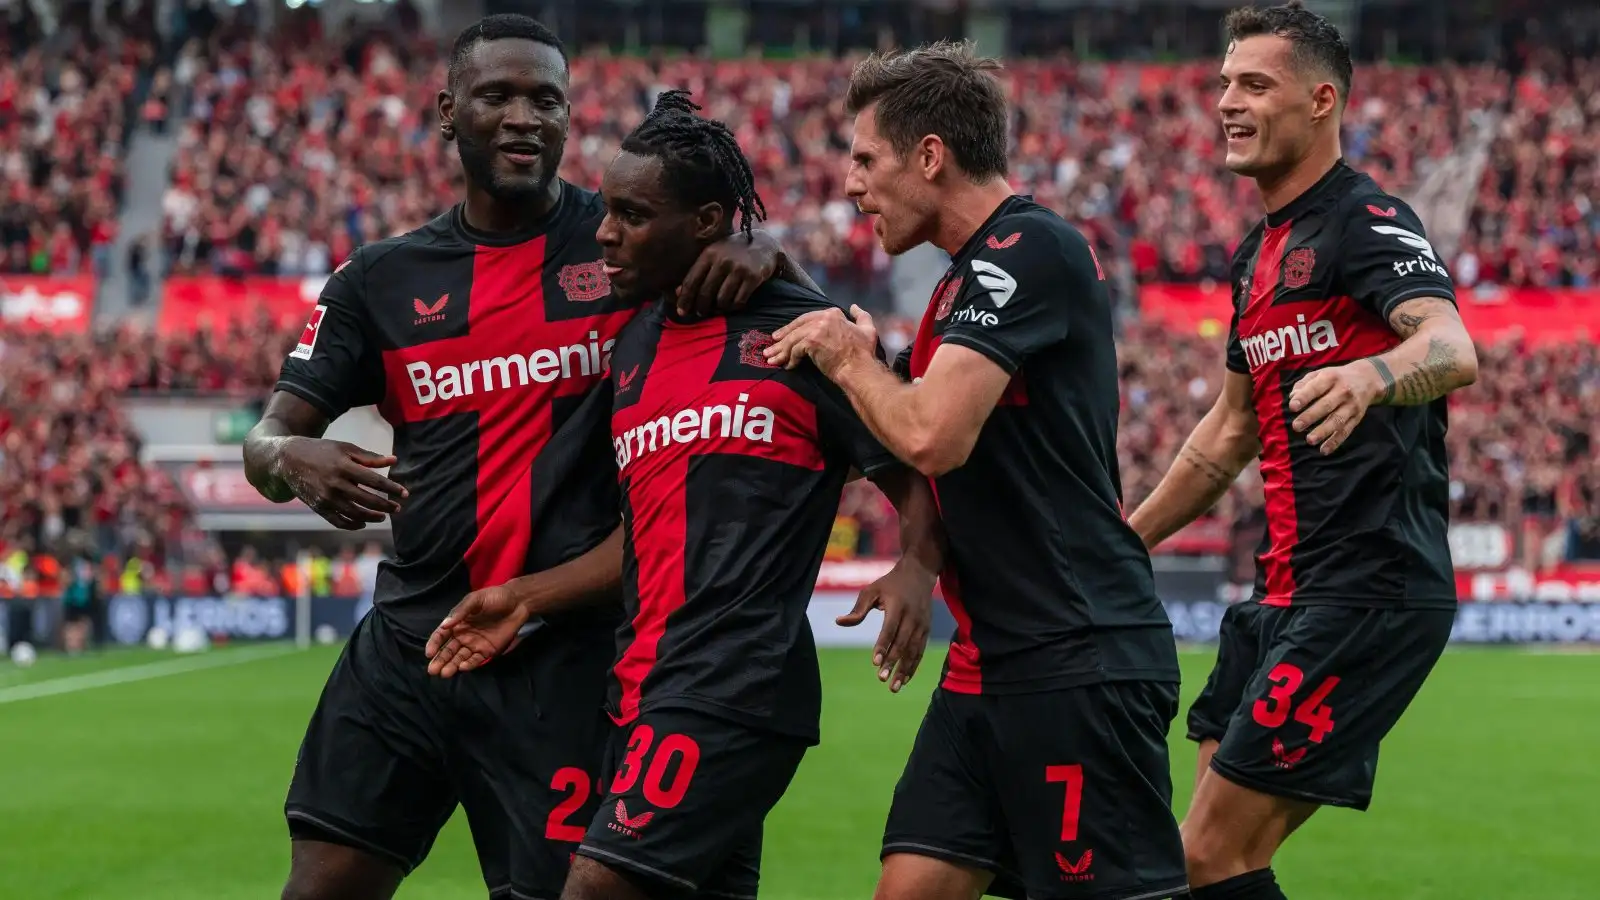 Bayer Leverkusen wing-back Jeremie Frimpong celebrates his goal with his teammates.